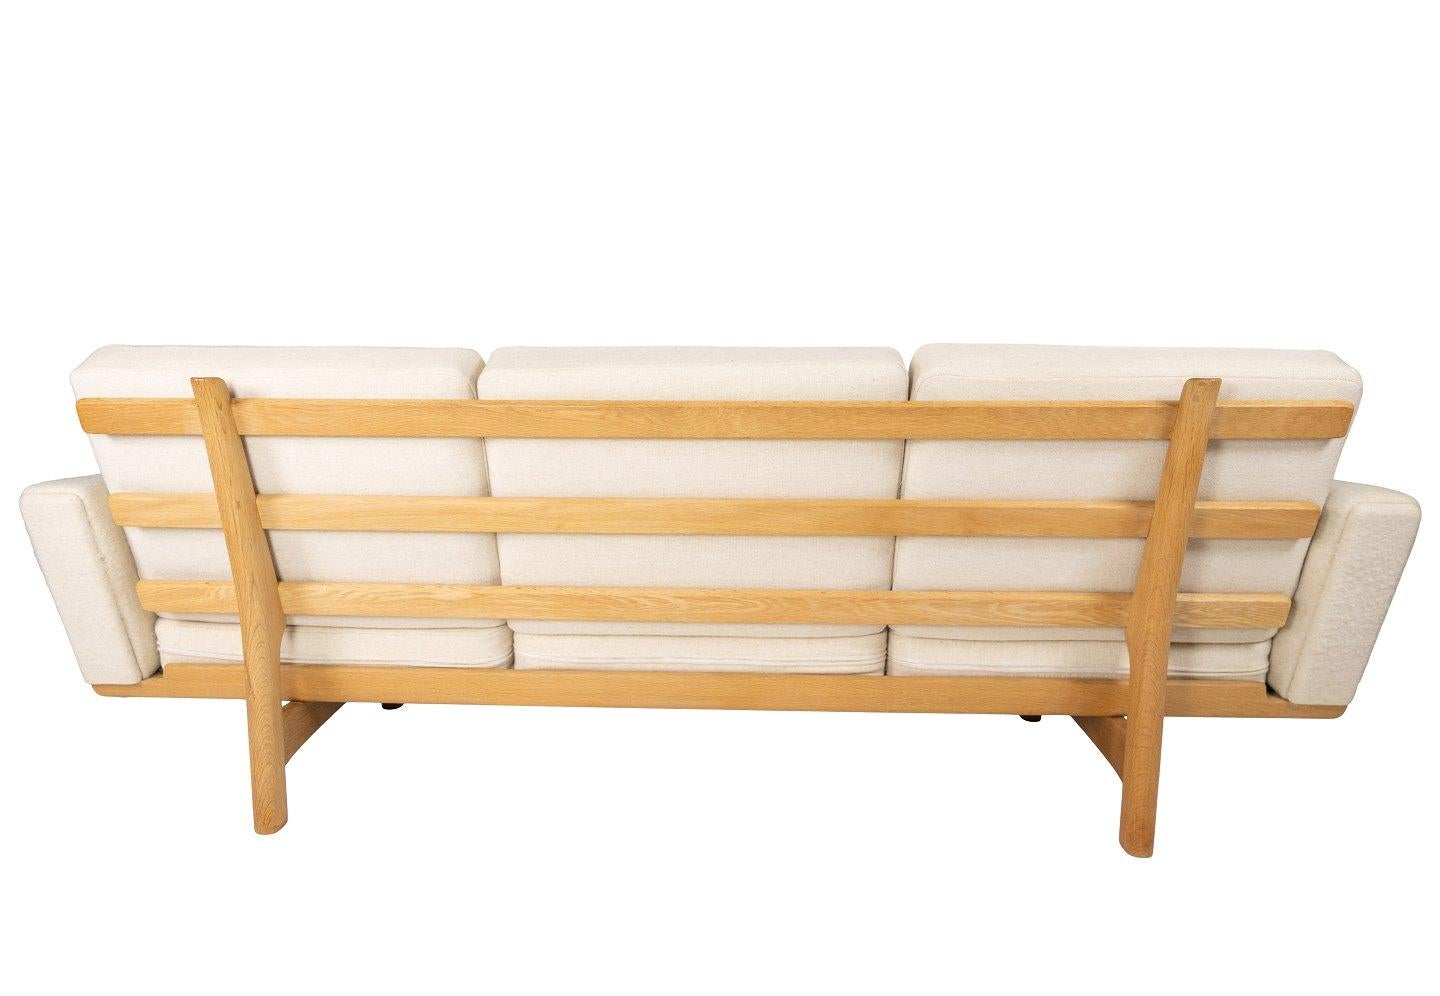 Three-seat sofa, model GE-236/3, designed by Hans J. Wegner and manufactured by GETAMA in the 1960s. The sofa is upholstered with light wool fabric and of oak.